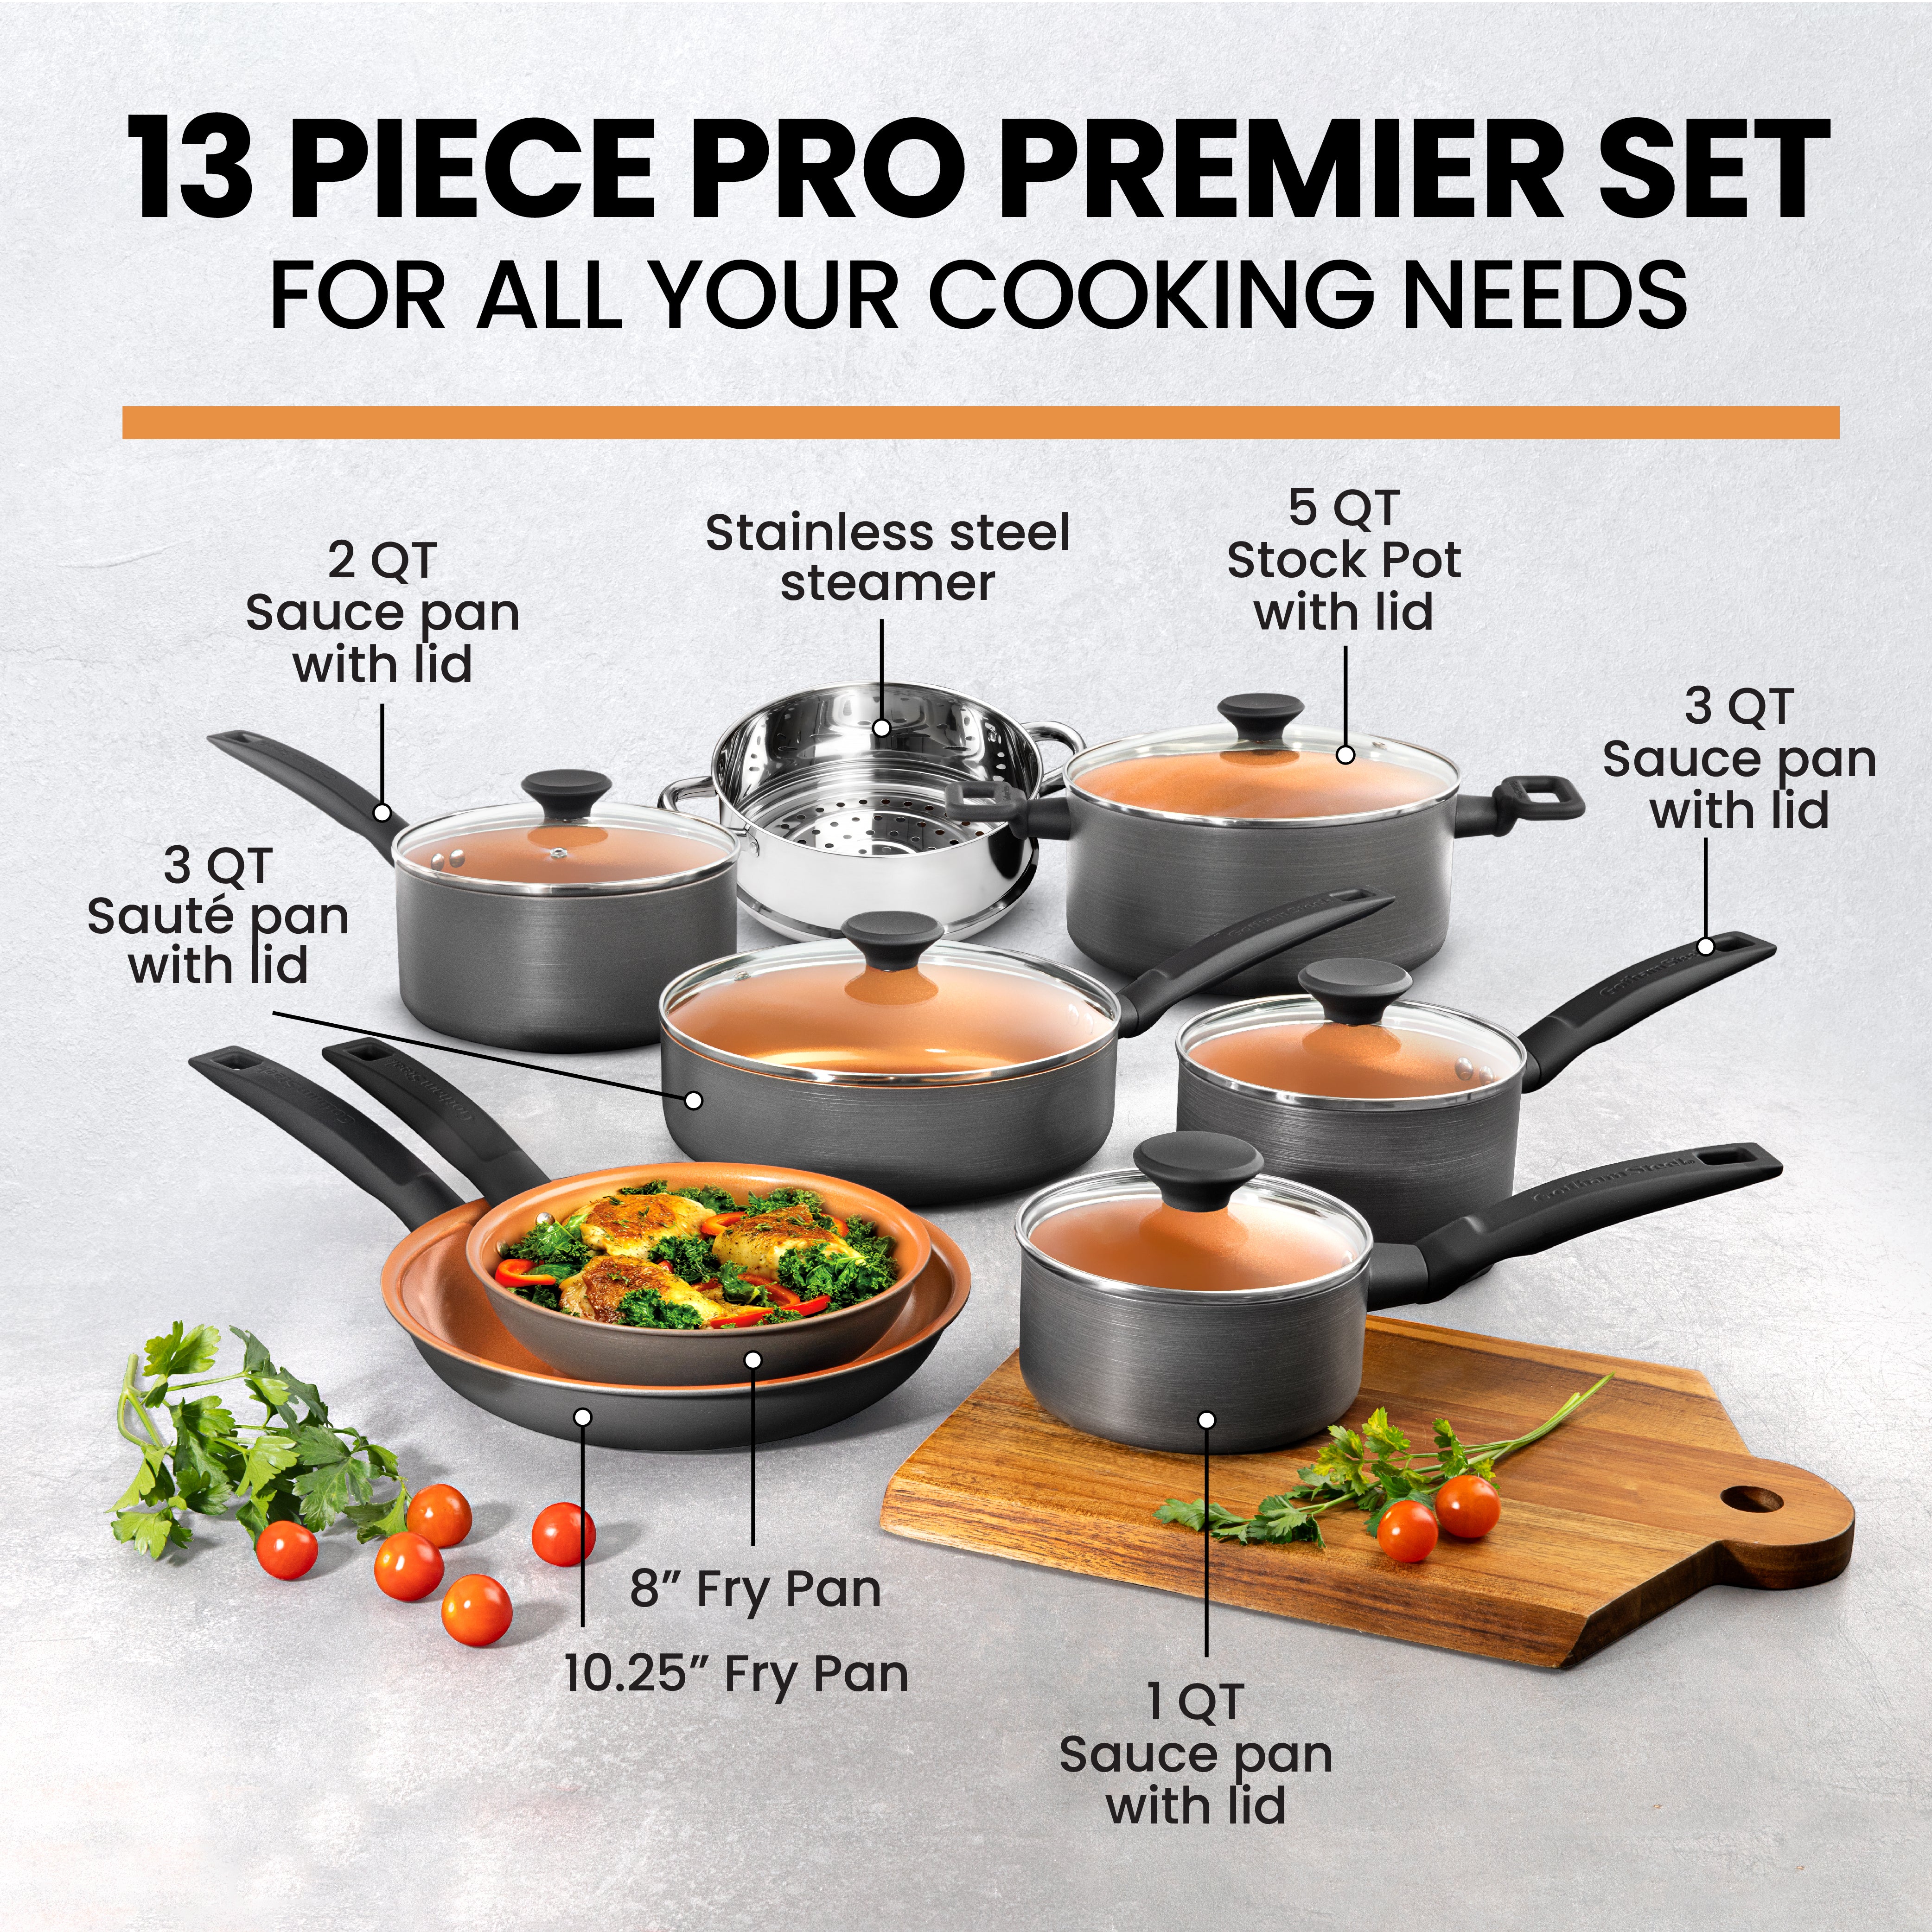 Gotham Steel Pro Hard Anodized Cookware Set, 13 pc - Fry's Food Stores